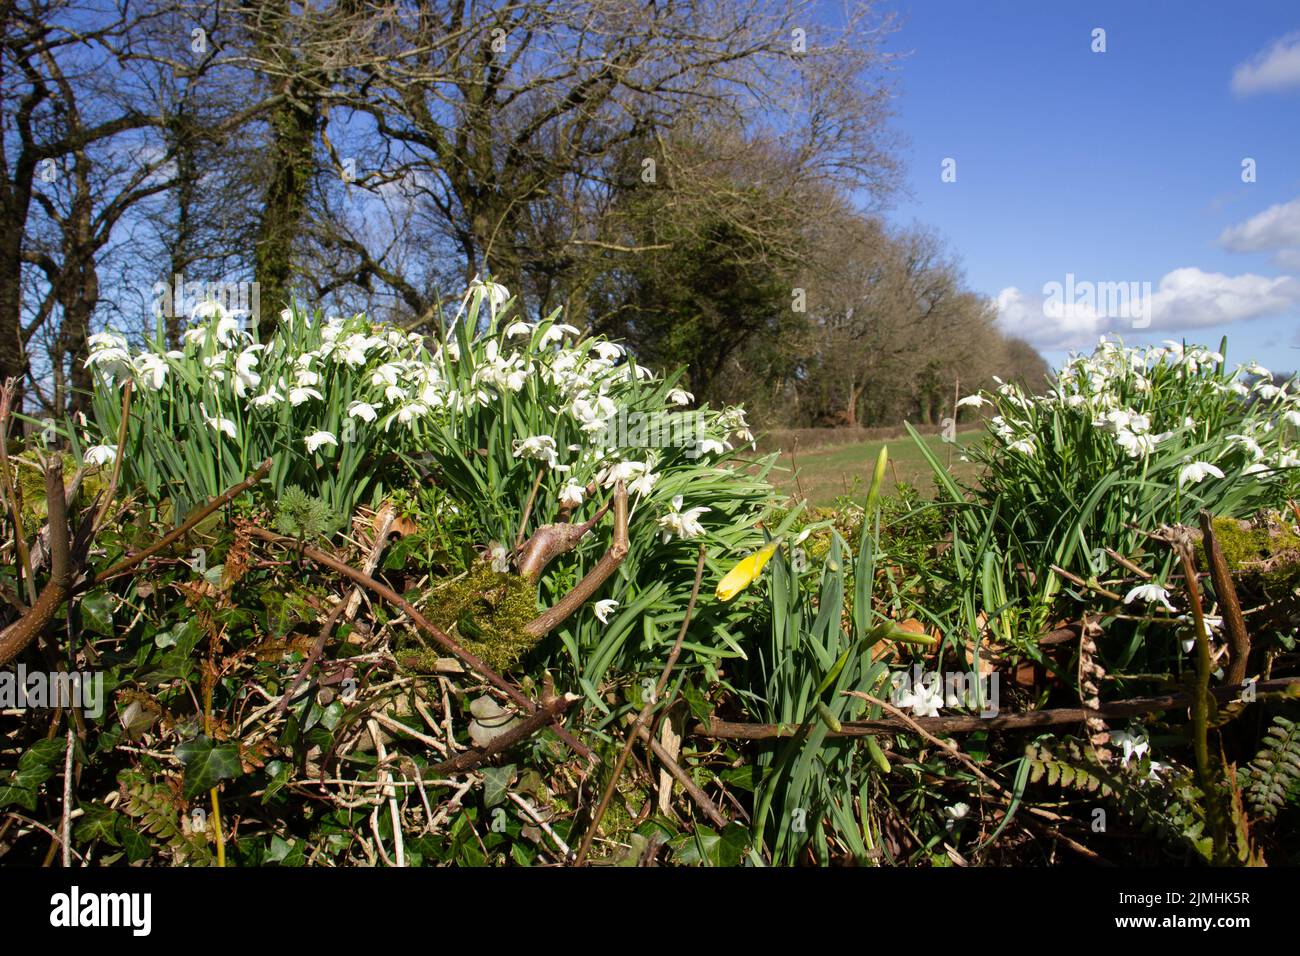 Snowdrops, Galanthus flowering on the top of a Devon bank with trees and a clear sky and white clouds Stock Photo